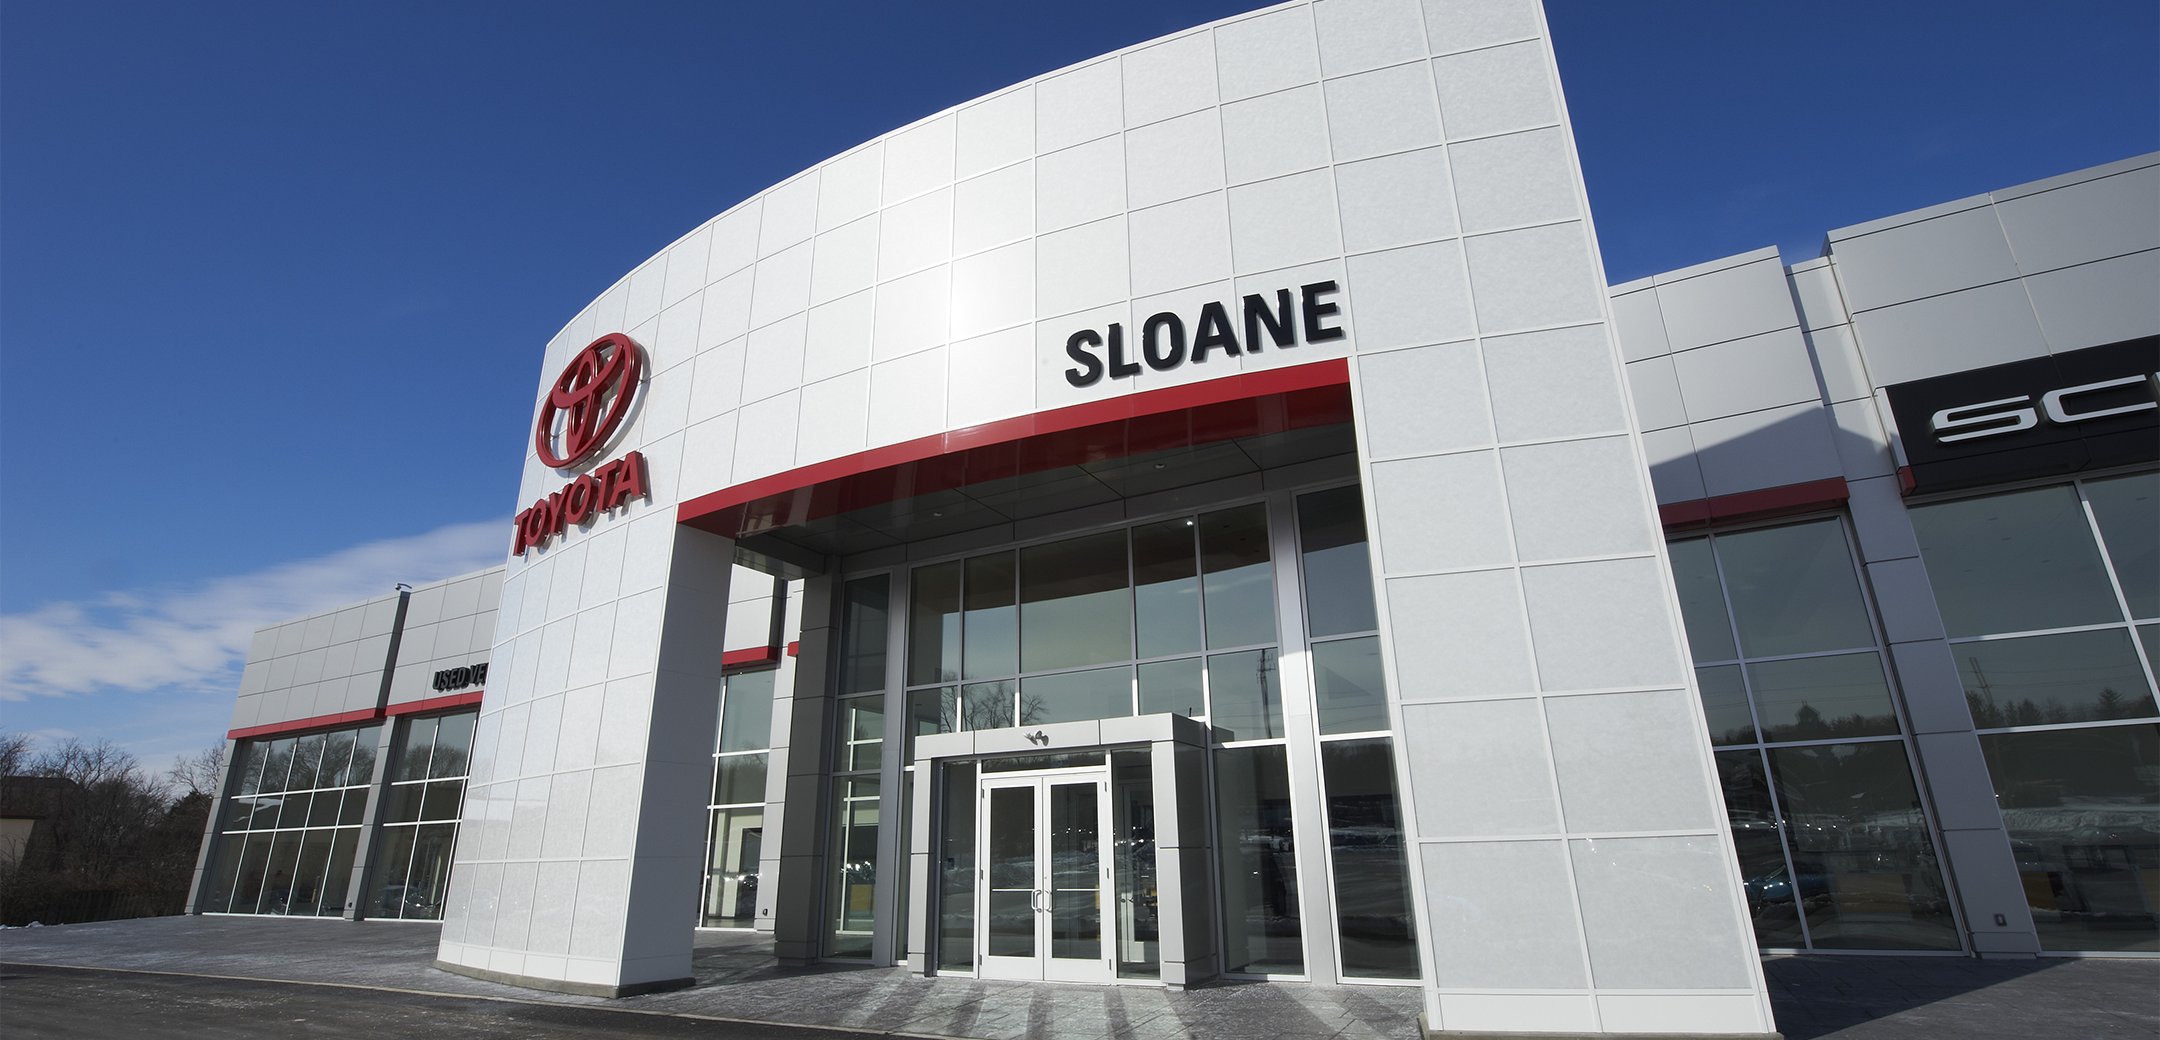 A close up exterior view of the Sloane front entrance, showcasing the glass door, "Sloane" and "Toyota" on the entrance overhang.